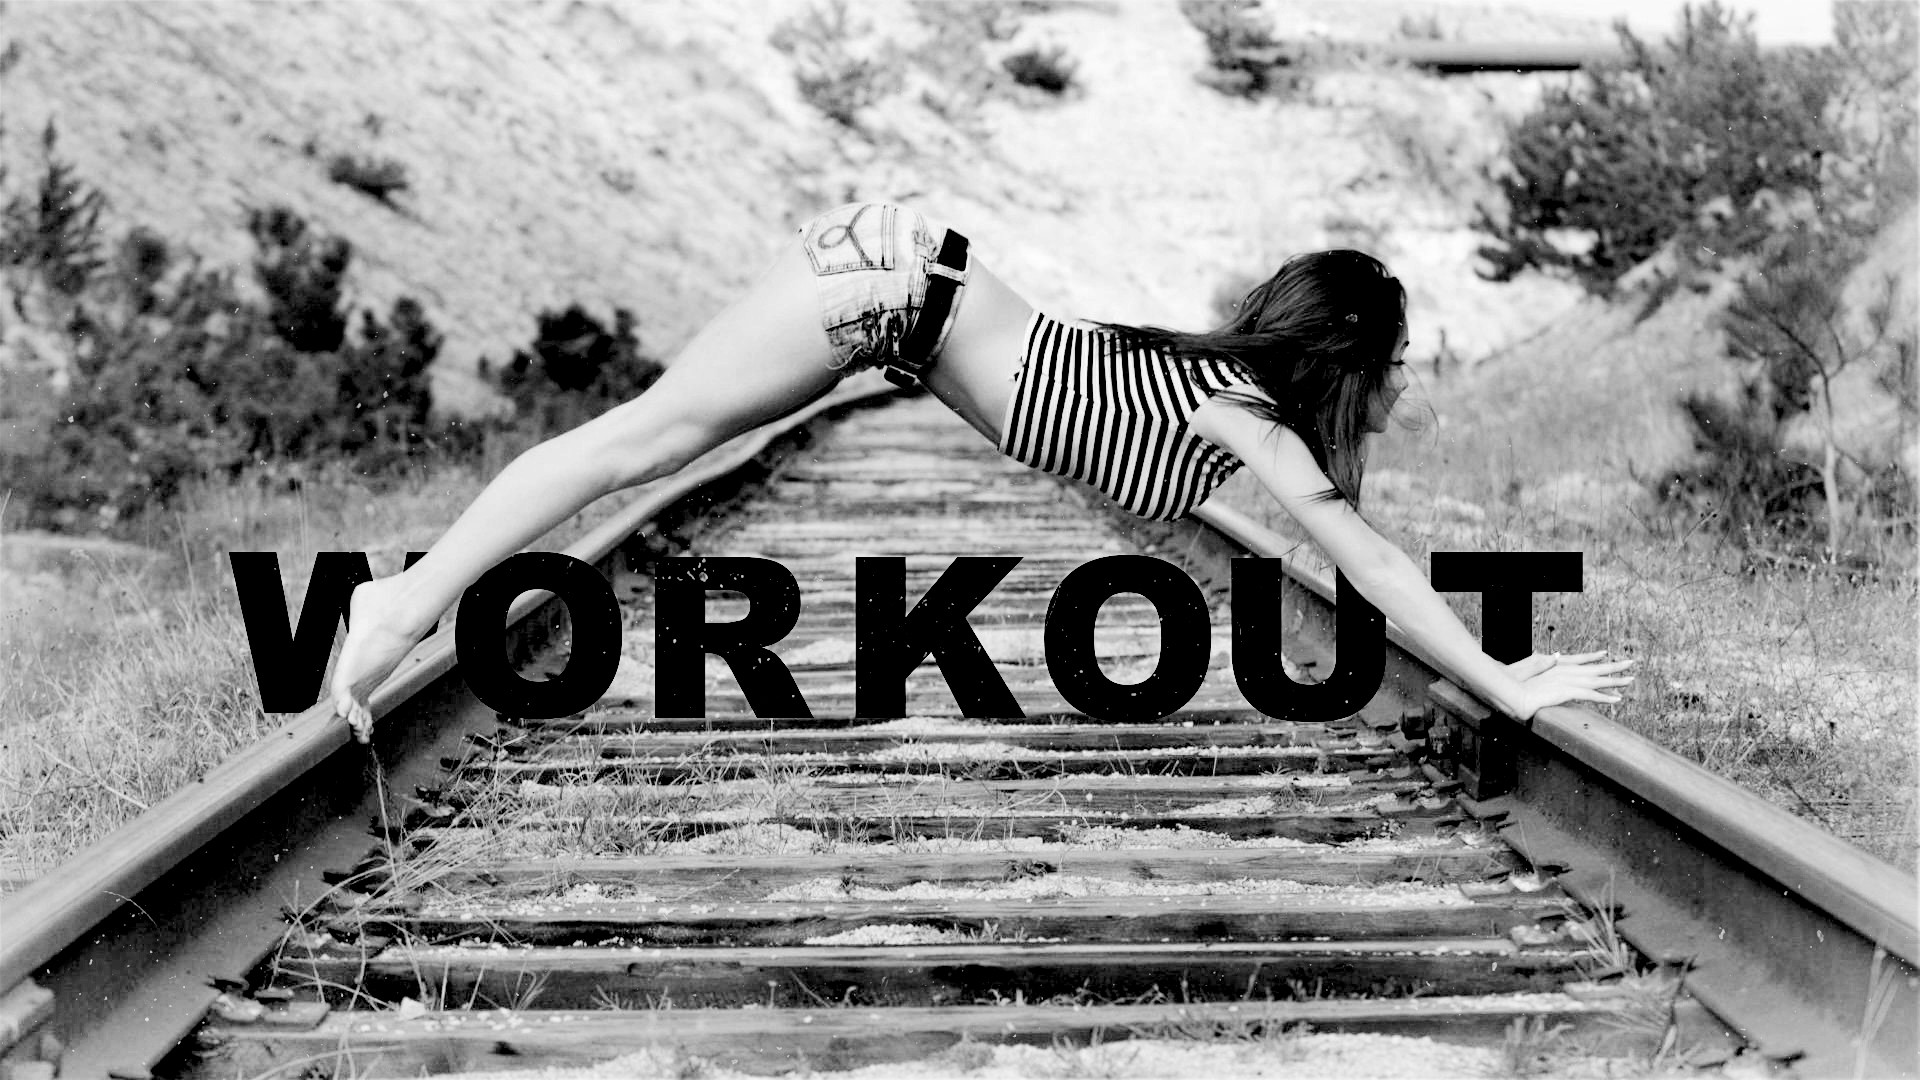 WORKOUT HD WALLPAPER by andrewholden WORKOUT HD WALLPAPER by andrewholden